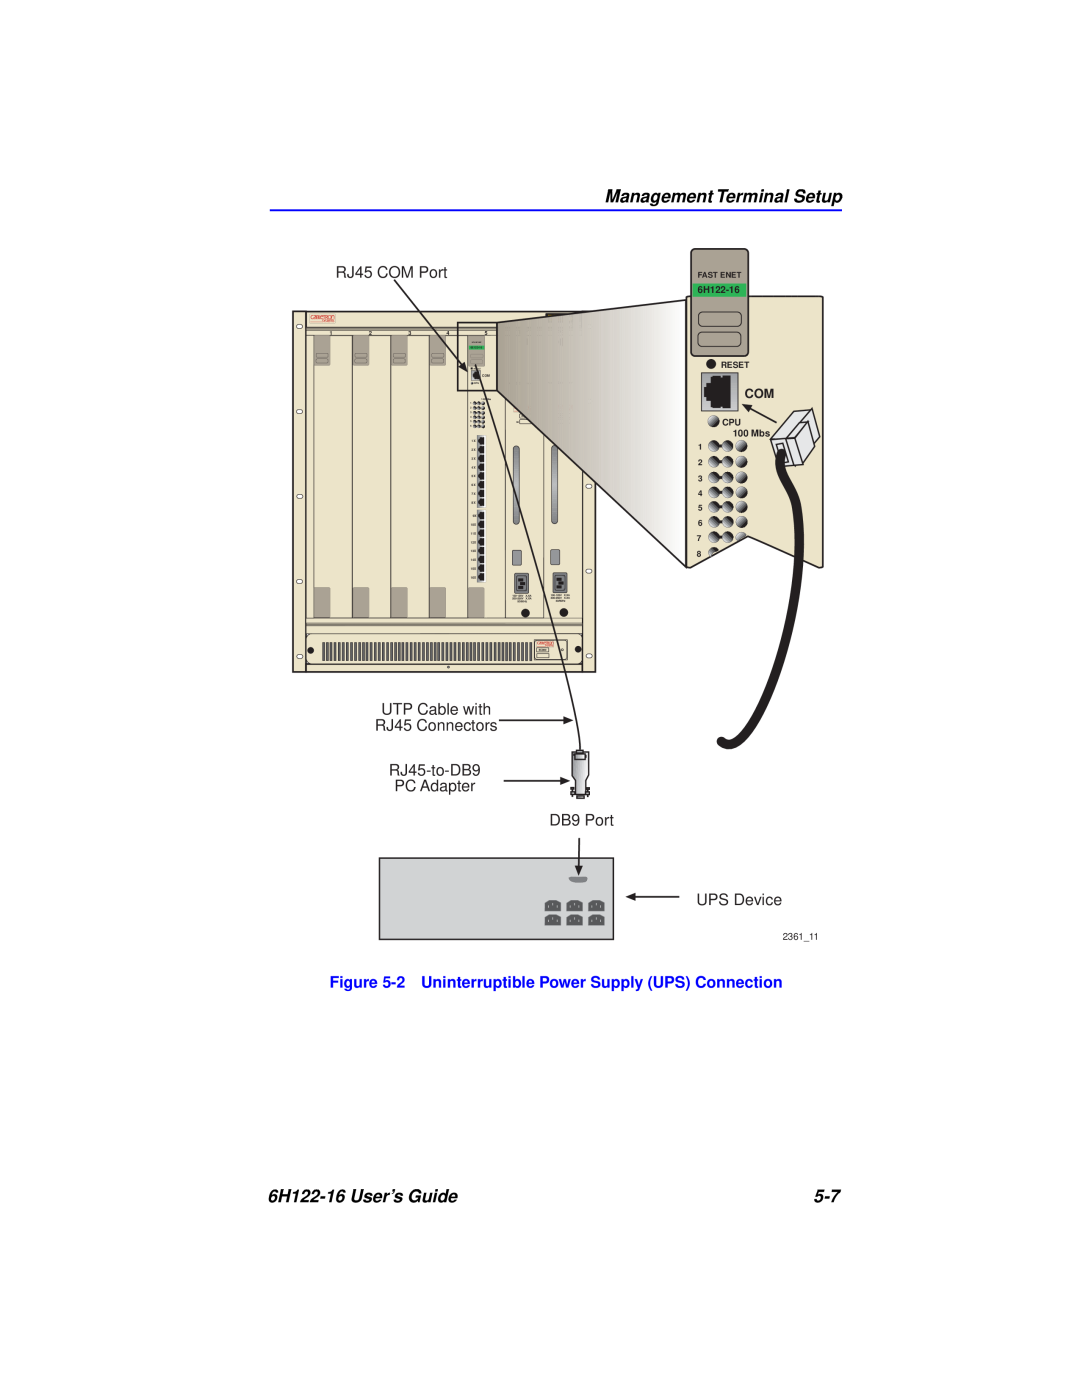 Cabletron Systems manual Management Terminal Setup, 6H122-16 User’s Guide, 2 Uninterruptible Power Supply UPS Connection 